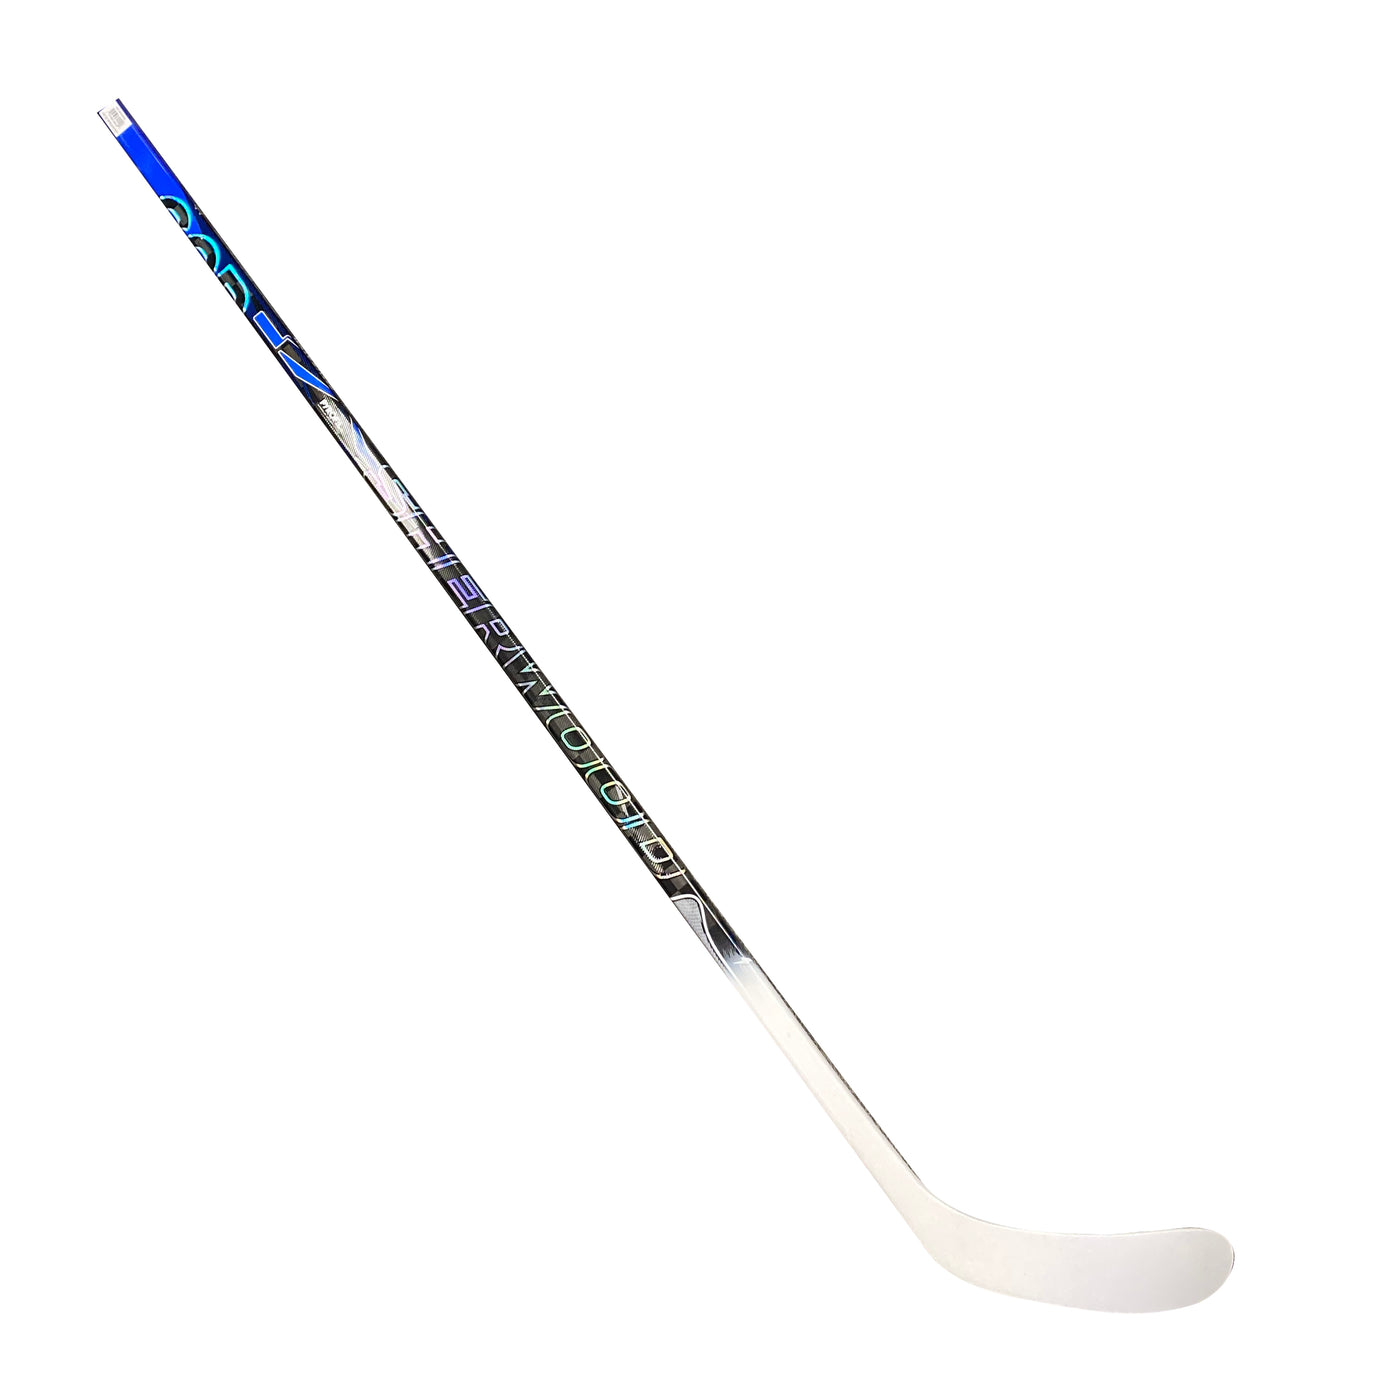 Sherwood Code TMP Pro "Willy Styles" Special Edition Senior Hockey Stick